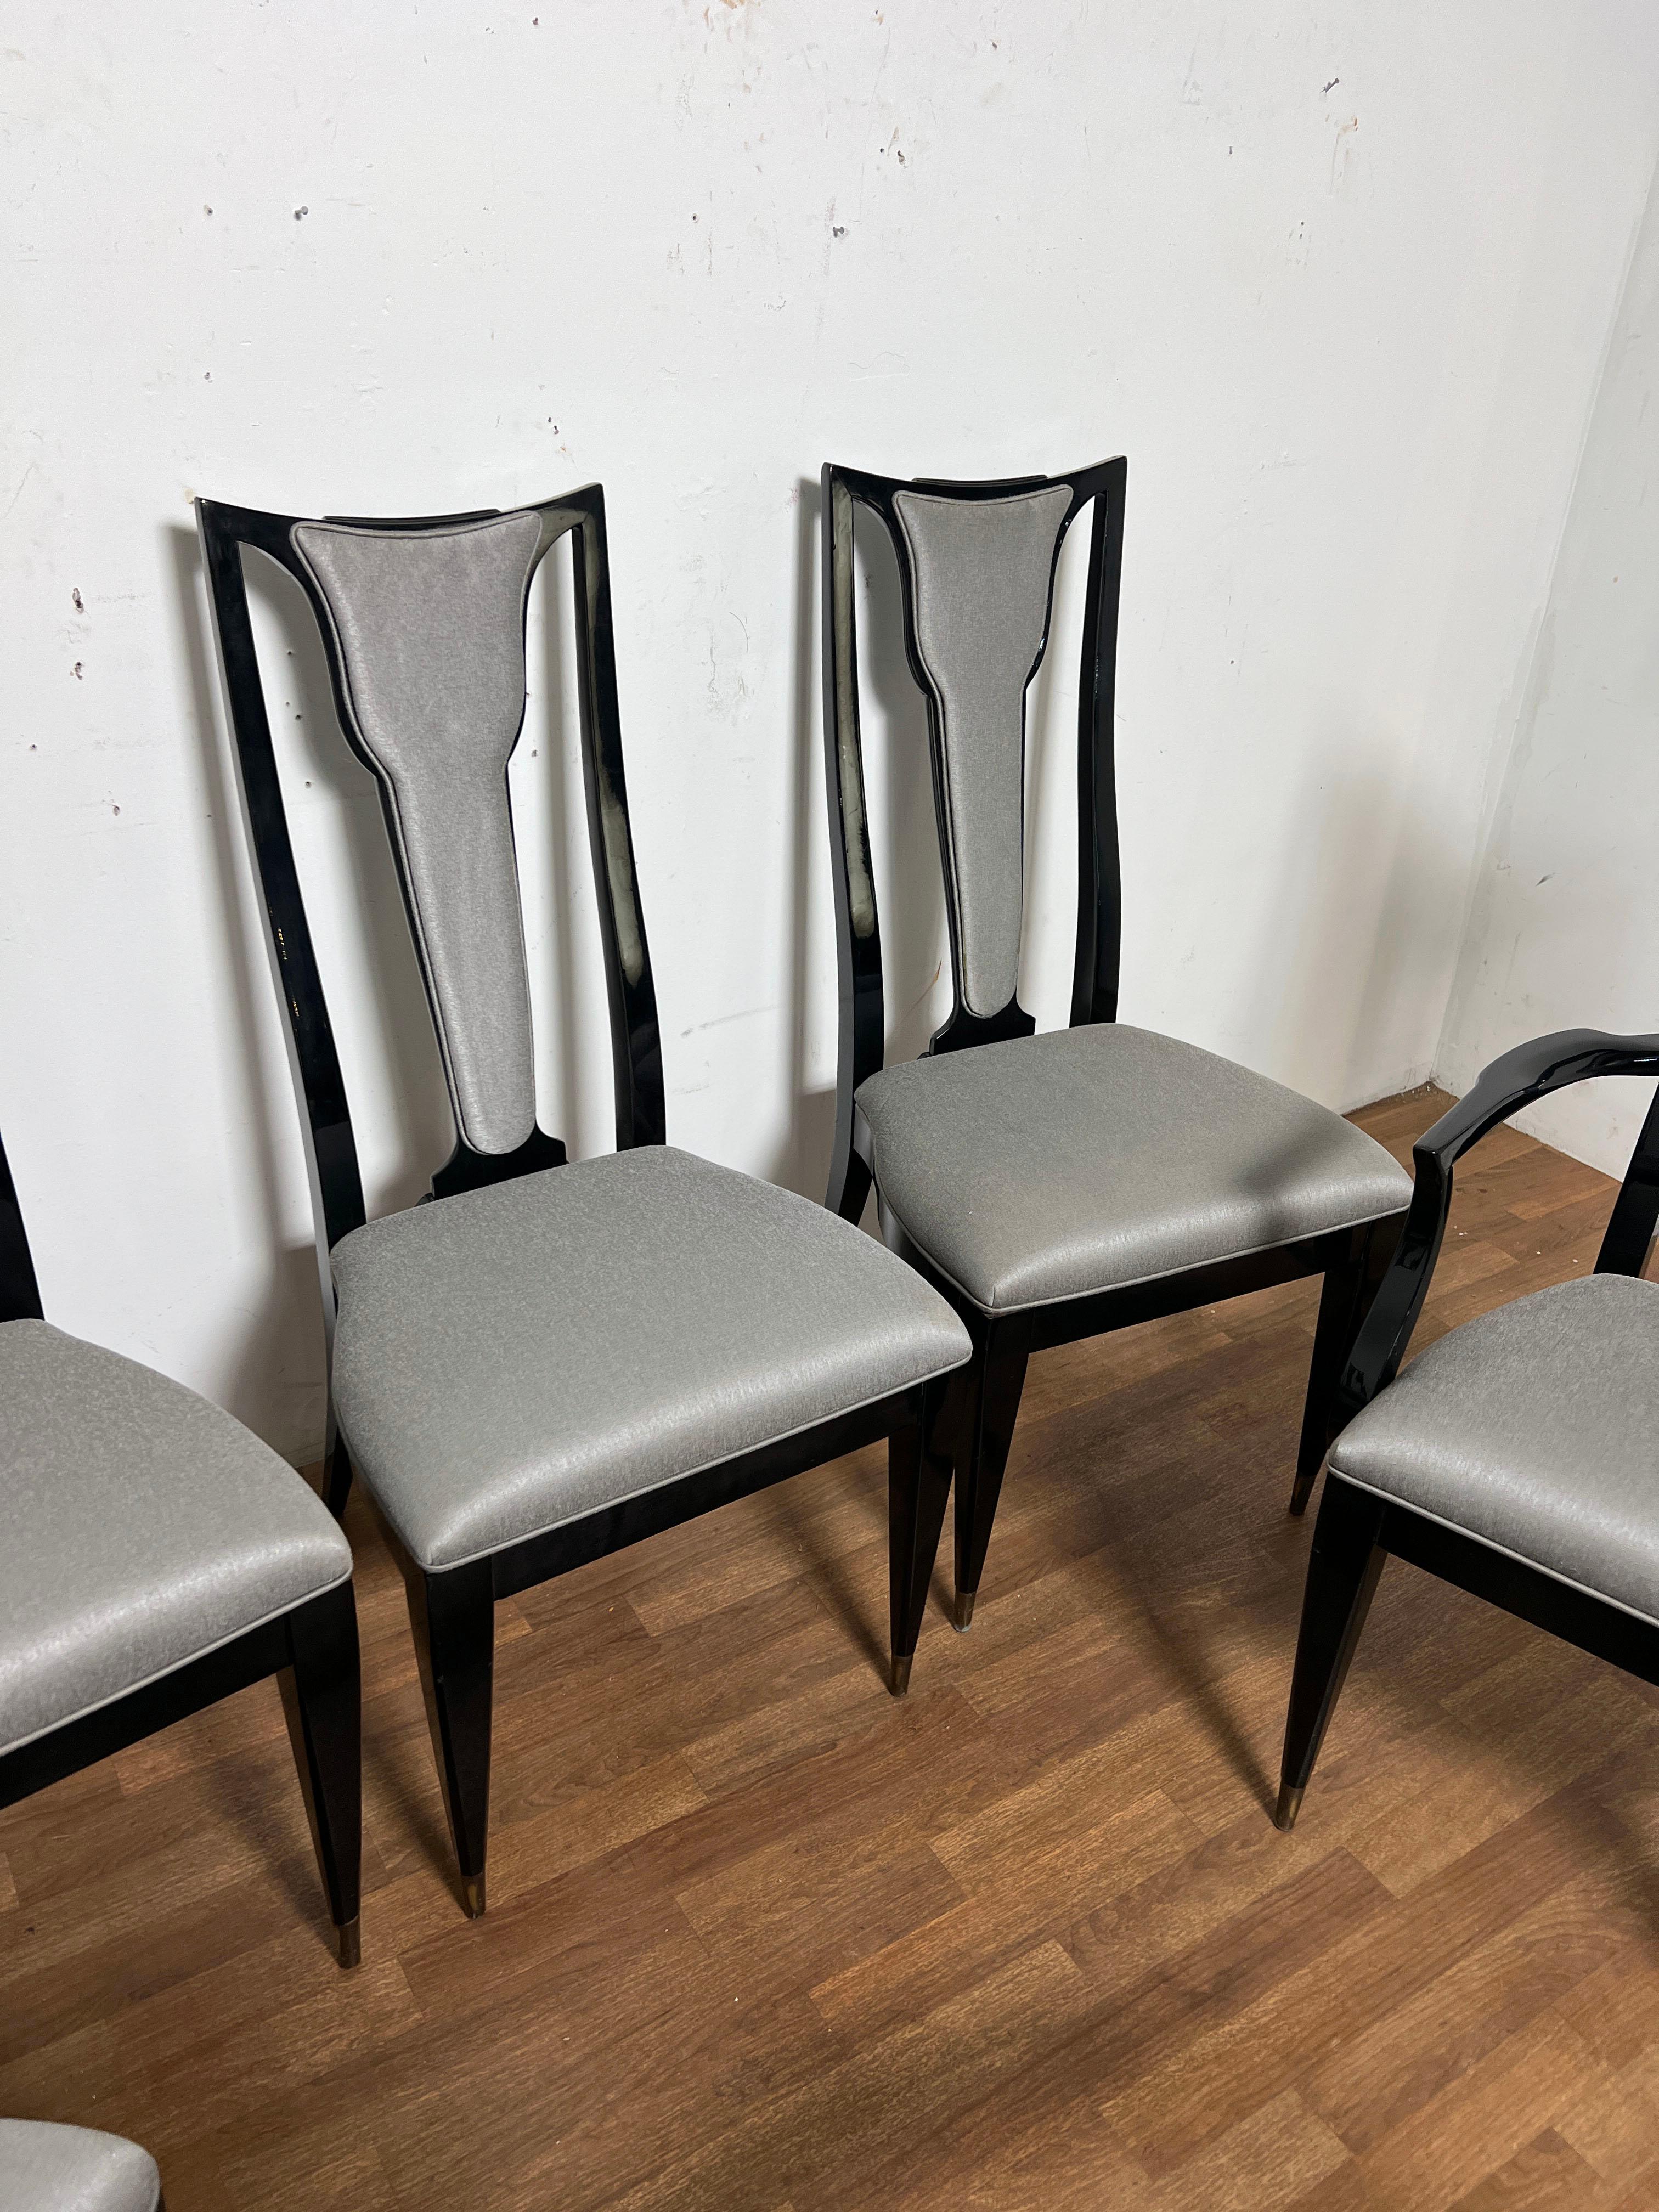 Set of Six Italian Modern Style Dining Chairs from Ryan Korban Interior For Sale 1